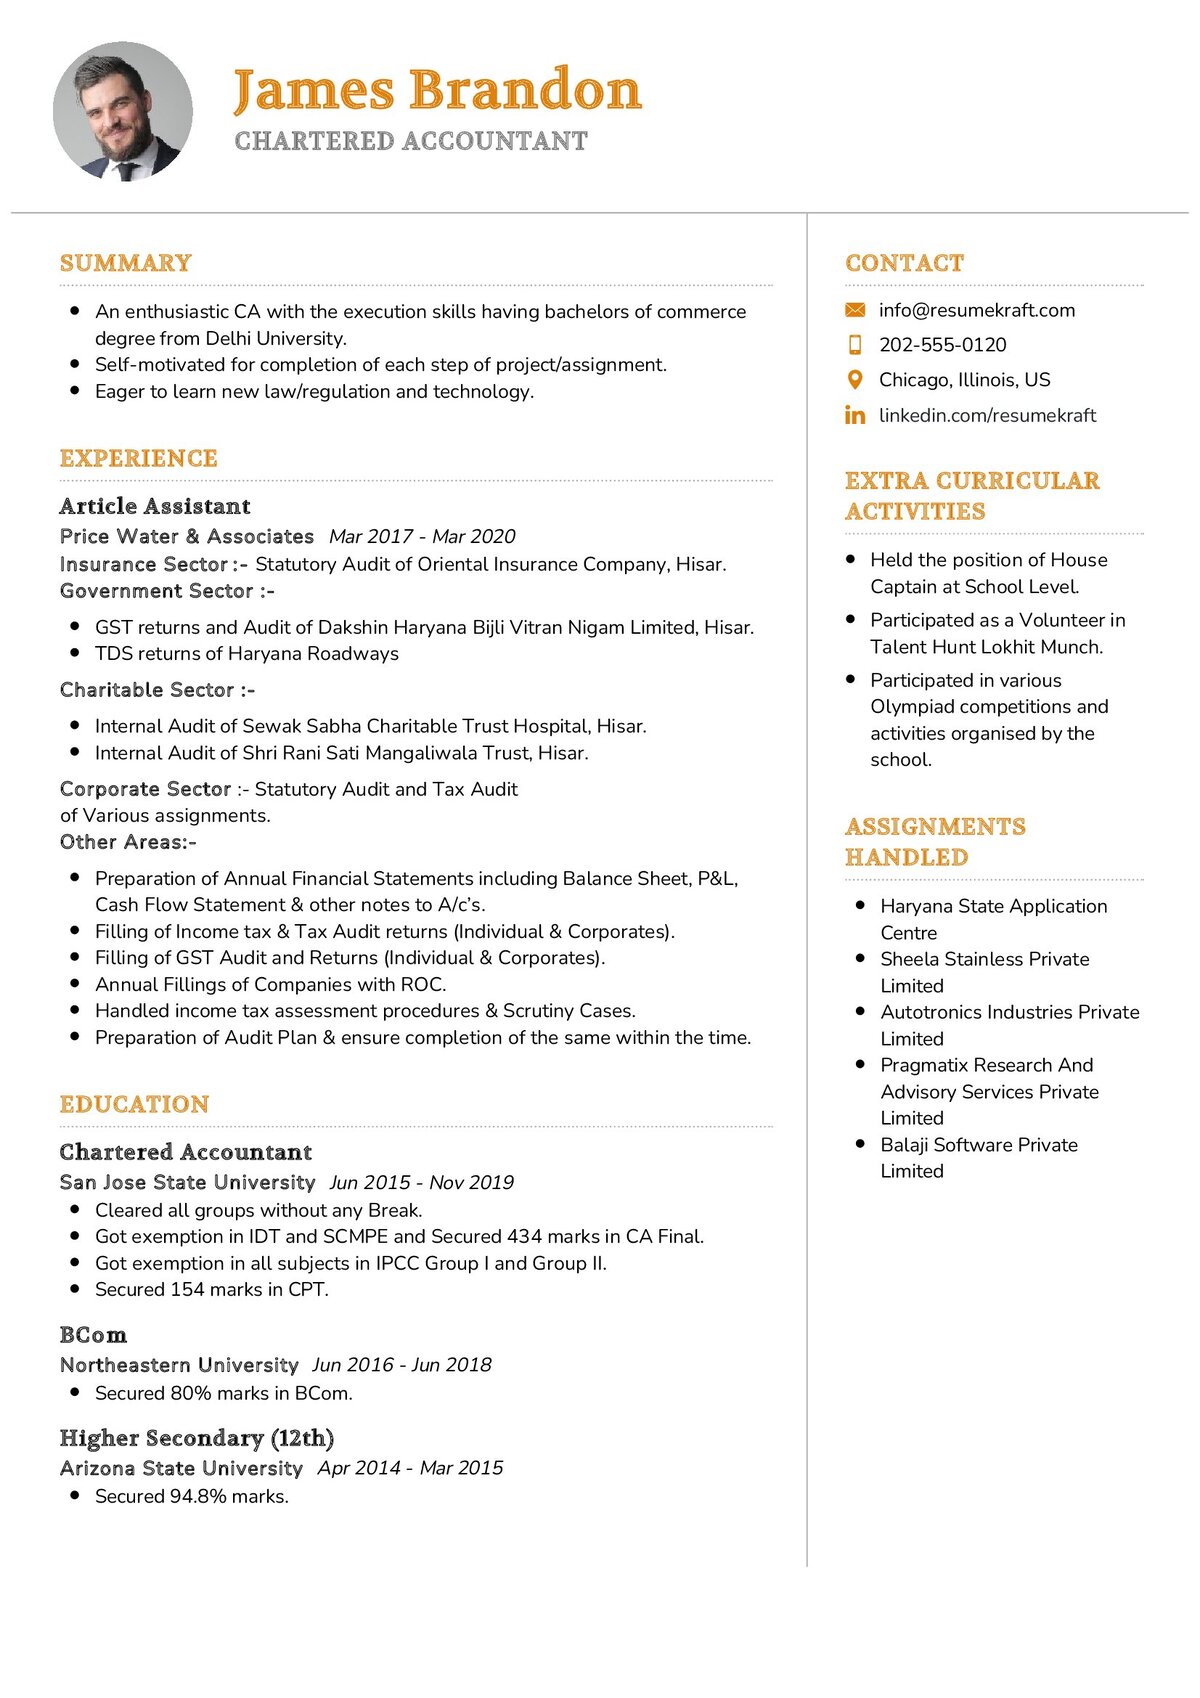 resume format for chartered accountant